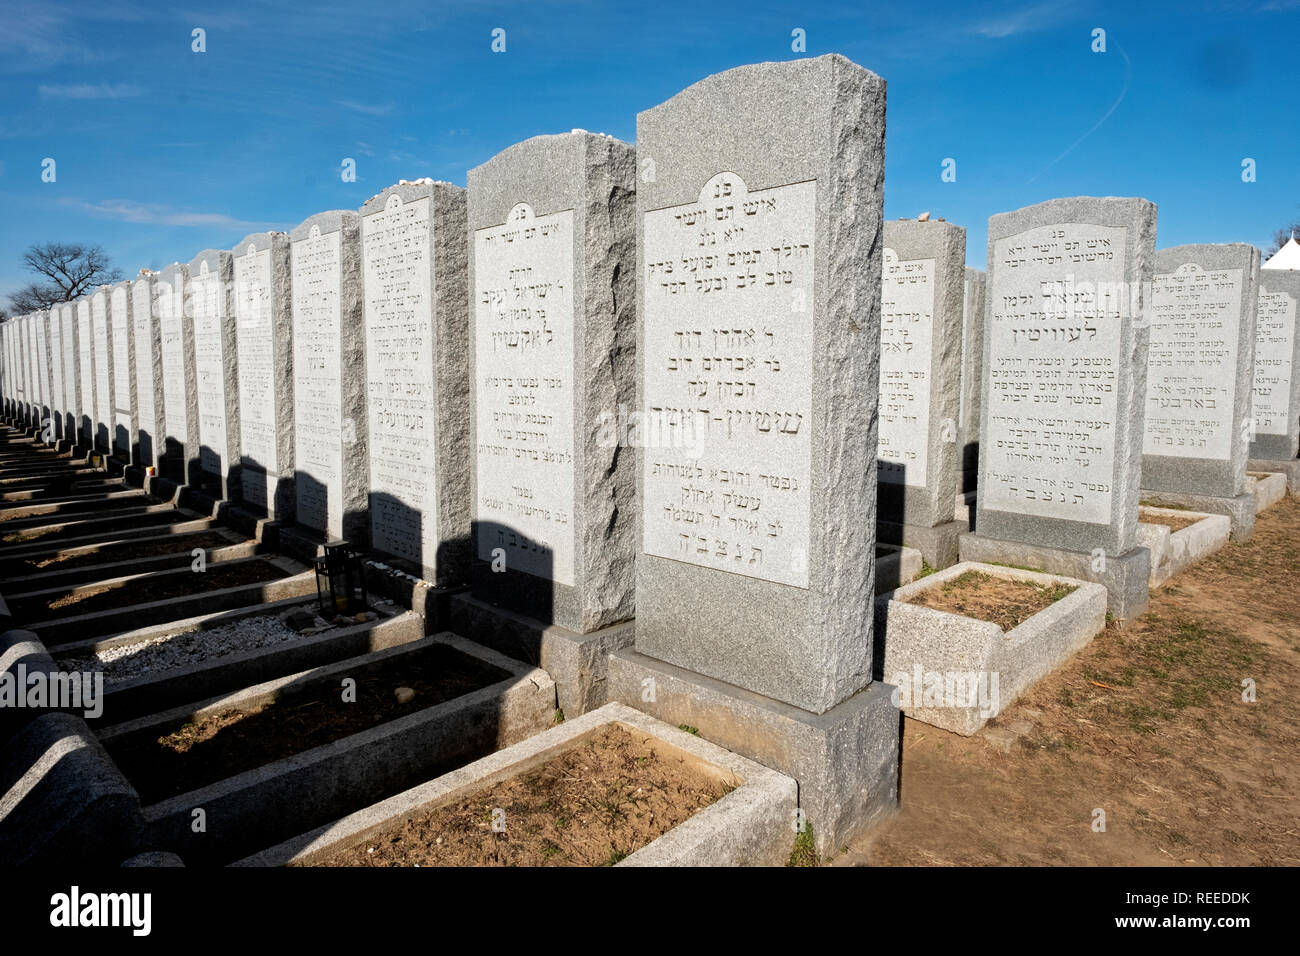 Rows of headstones with Hebrew writing at Montefiore Cemetery in Cambria Heights, Queens, New York City. Stock Photo